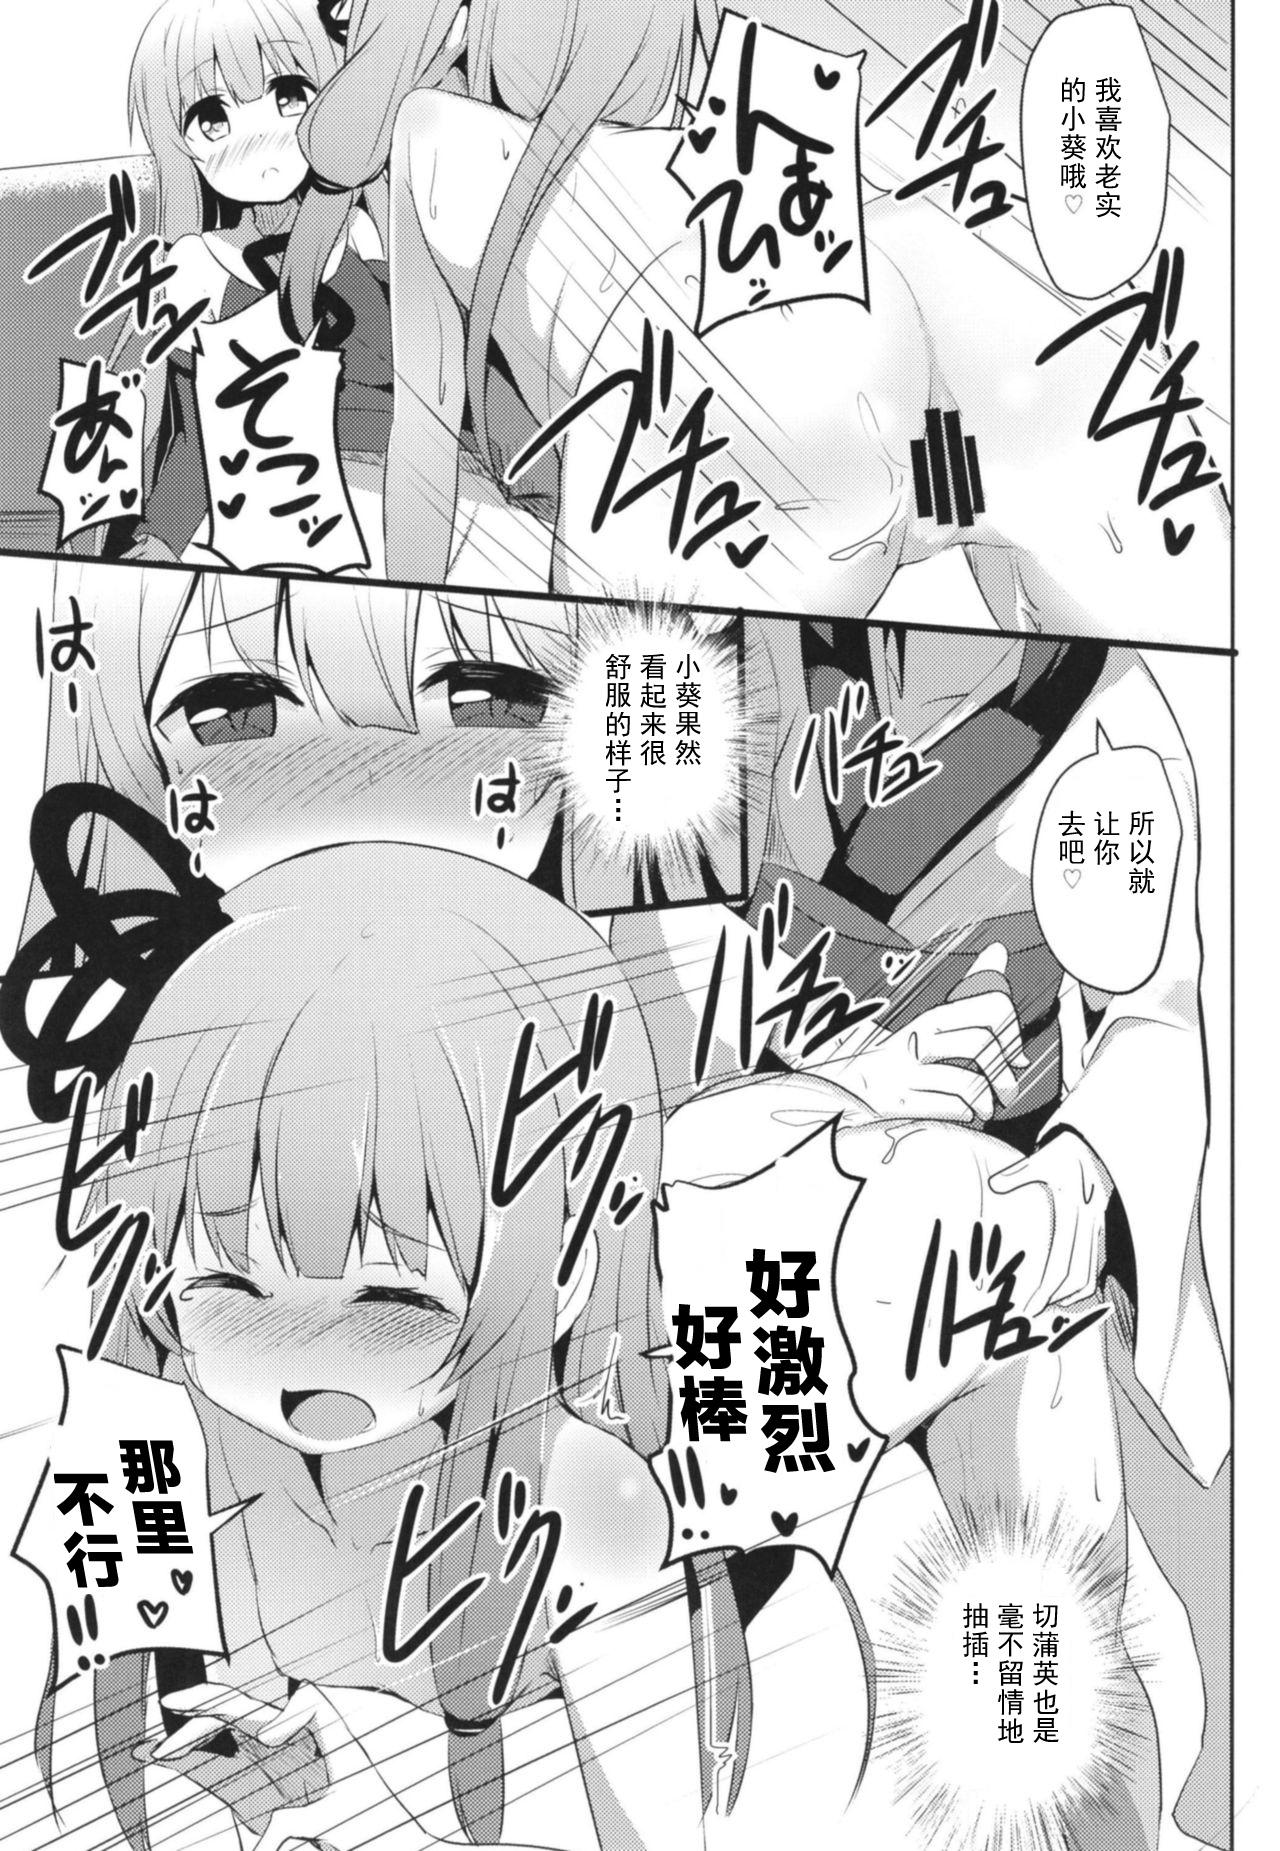 Blondes [Milk Pudding (Jamcy)] Akane-chan Challenge! 4-kaime (VOICEROID) [Chinese] [古早个人汉化] [Digital] - Voiceroid Chichona - Page 11